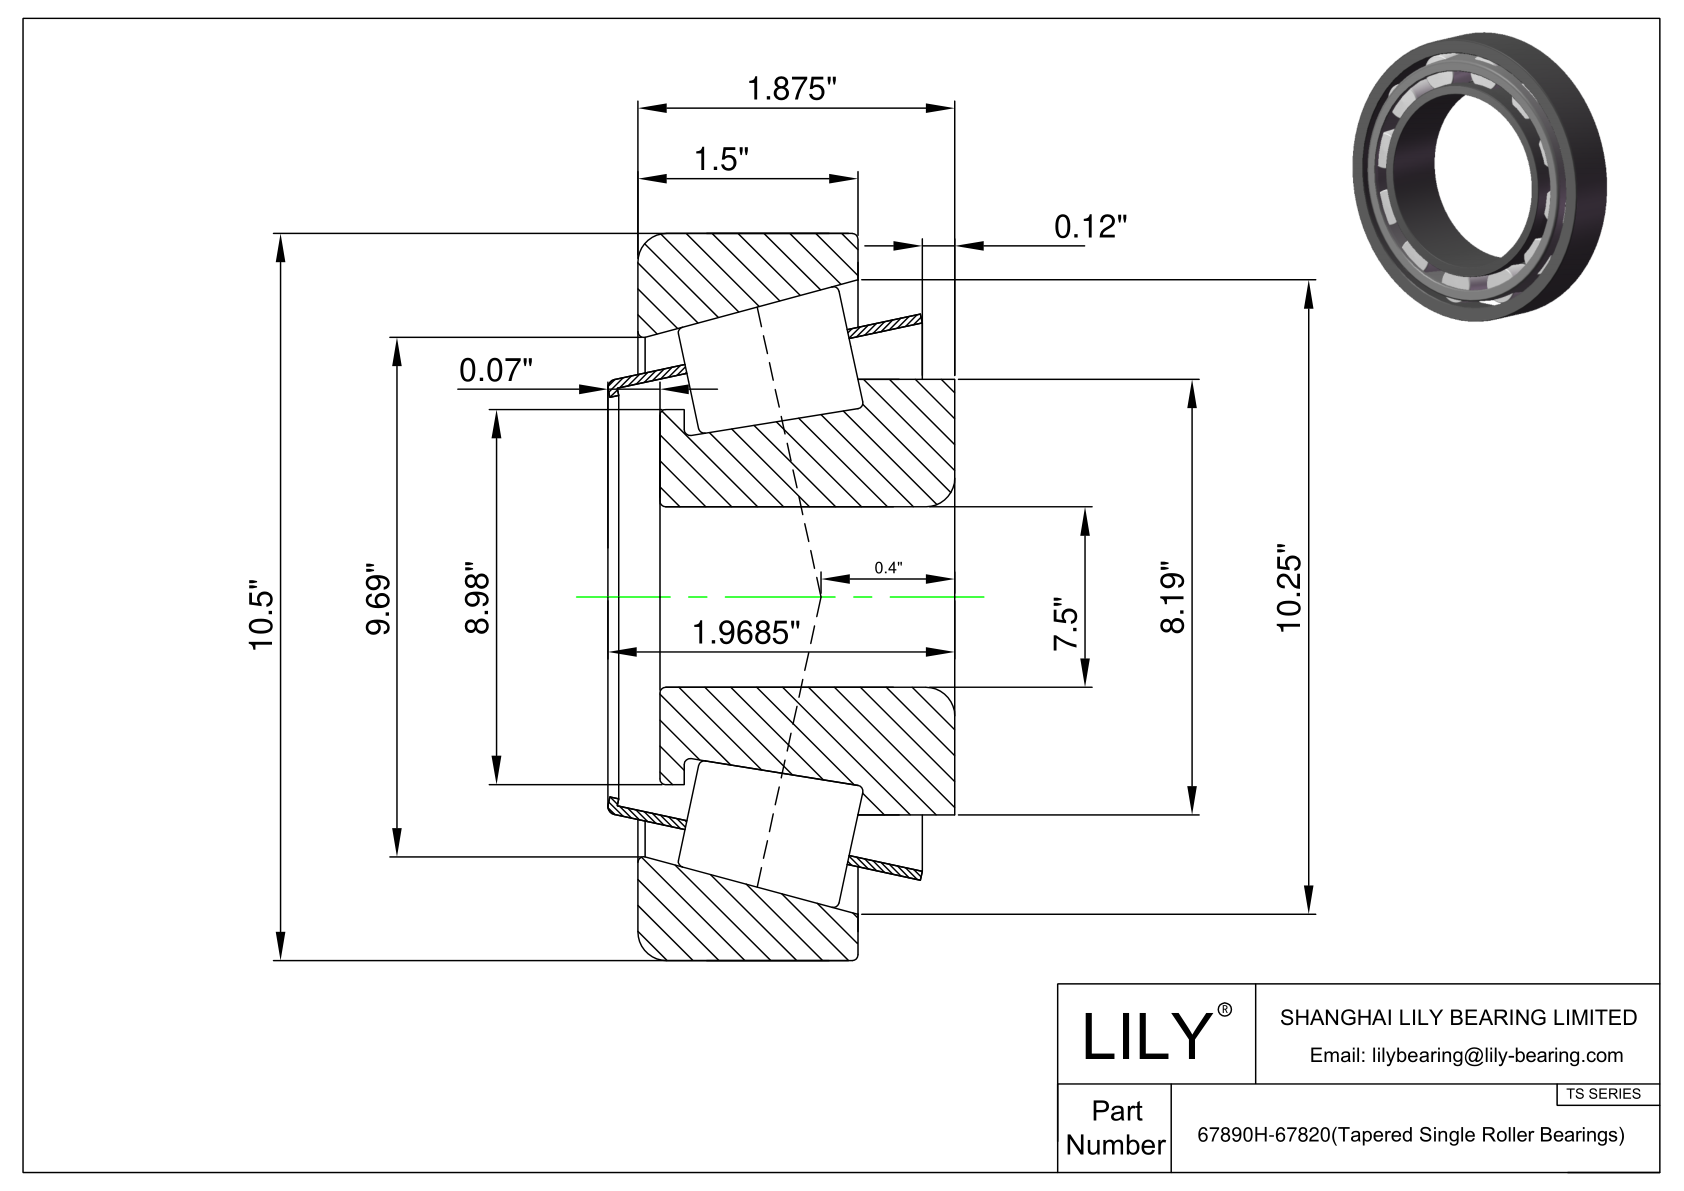 67890H-67820 TS (Tapered Single Roller Bearings) (Imperial) cad drawing